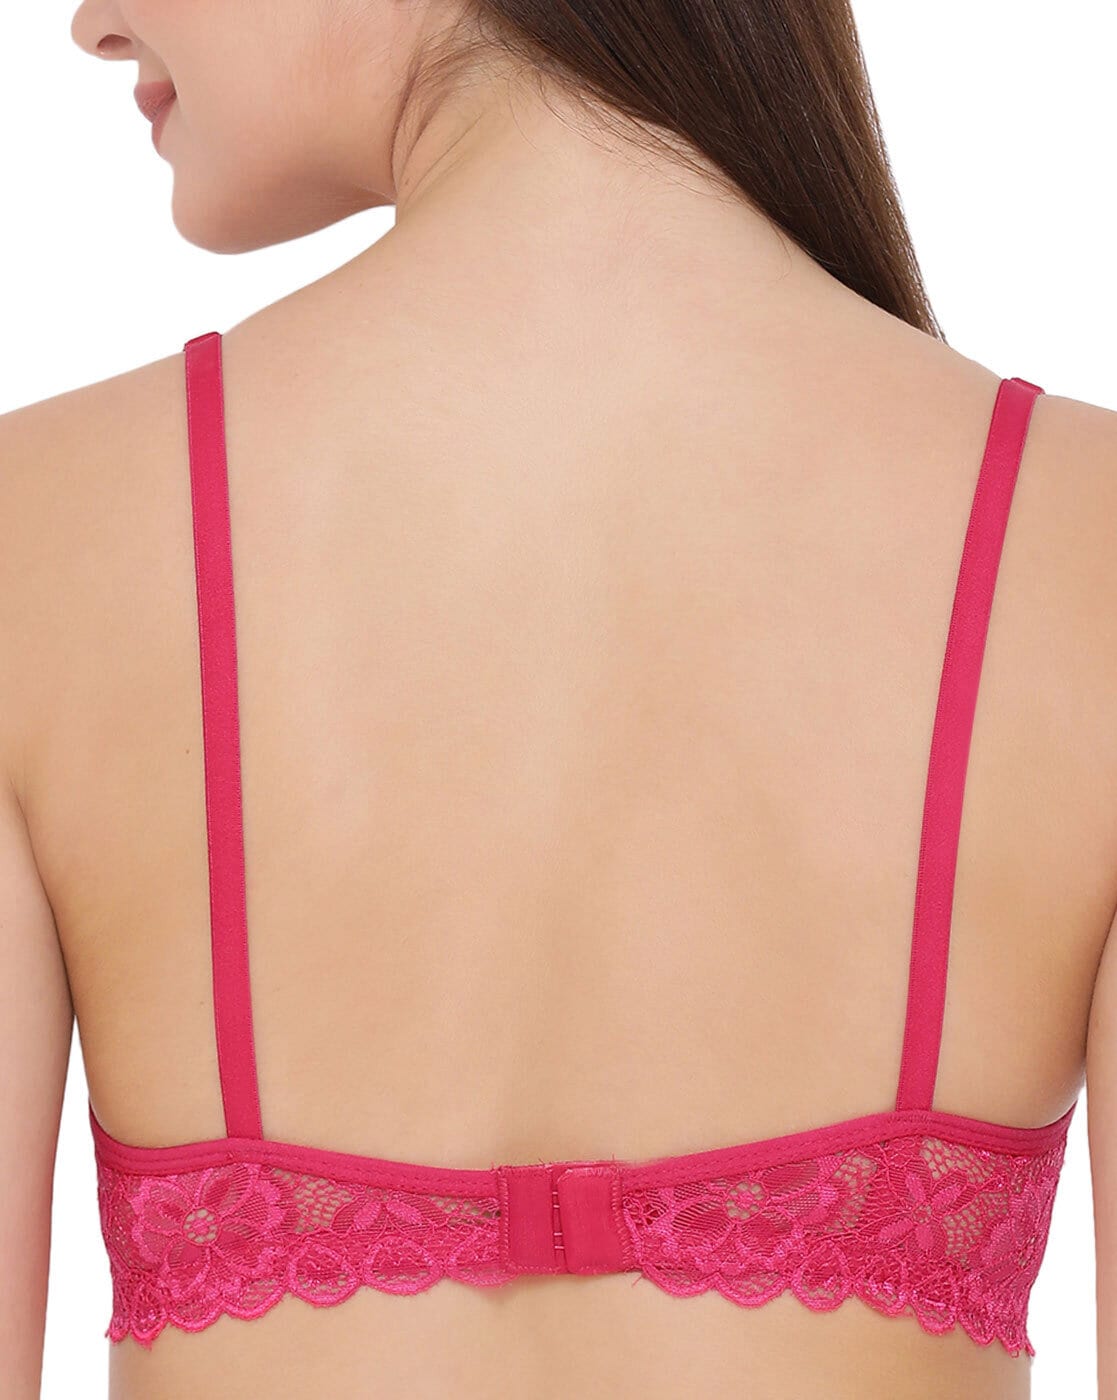 Lace Non-padded Wirefree Bra In Hot Pink, Bras :: All Bras Online Lingerie  Shopping: Clovia